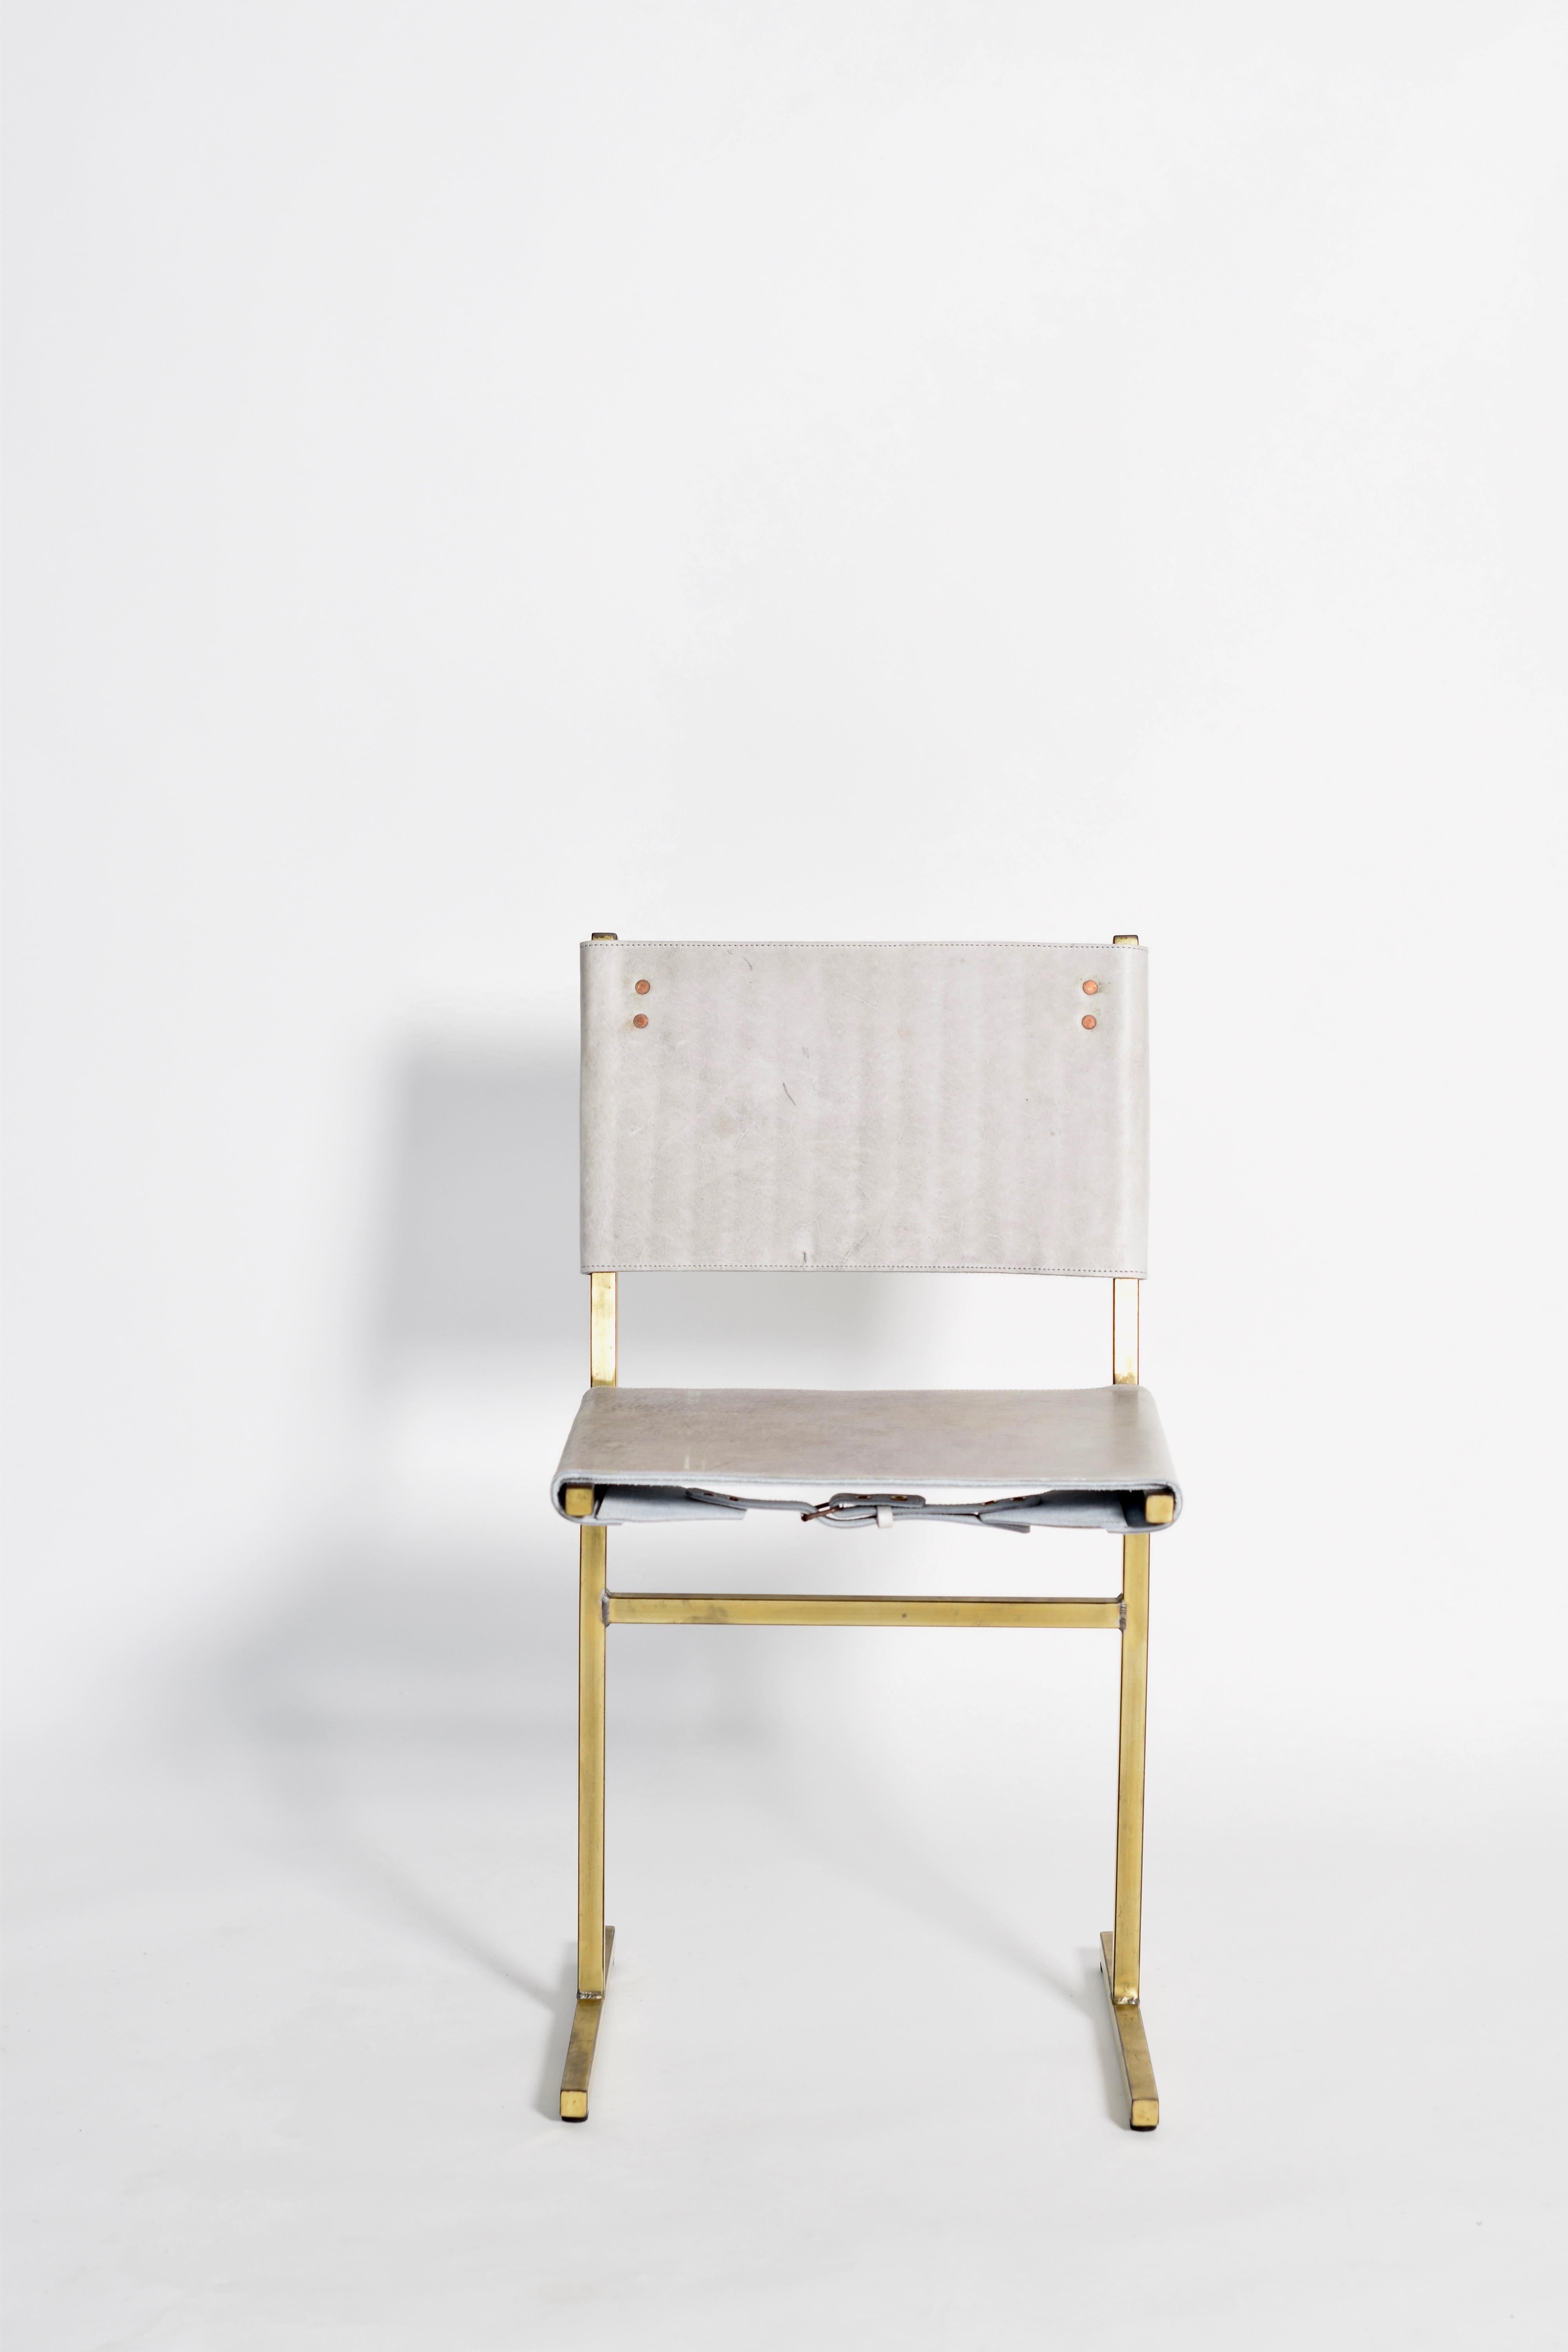 Grey and brass Memento chair, Jesse Sanderson
Original signed chair by Jesse Sanderson
Materials: Leather, Steel
Dimensions: W 43 x D 50 x H 80 cm 
 Seating height: 47 cm

Five lines and a circle – the human body can be as simple as the